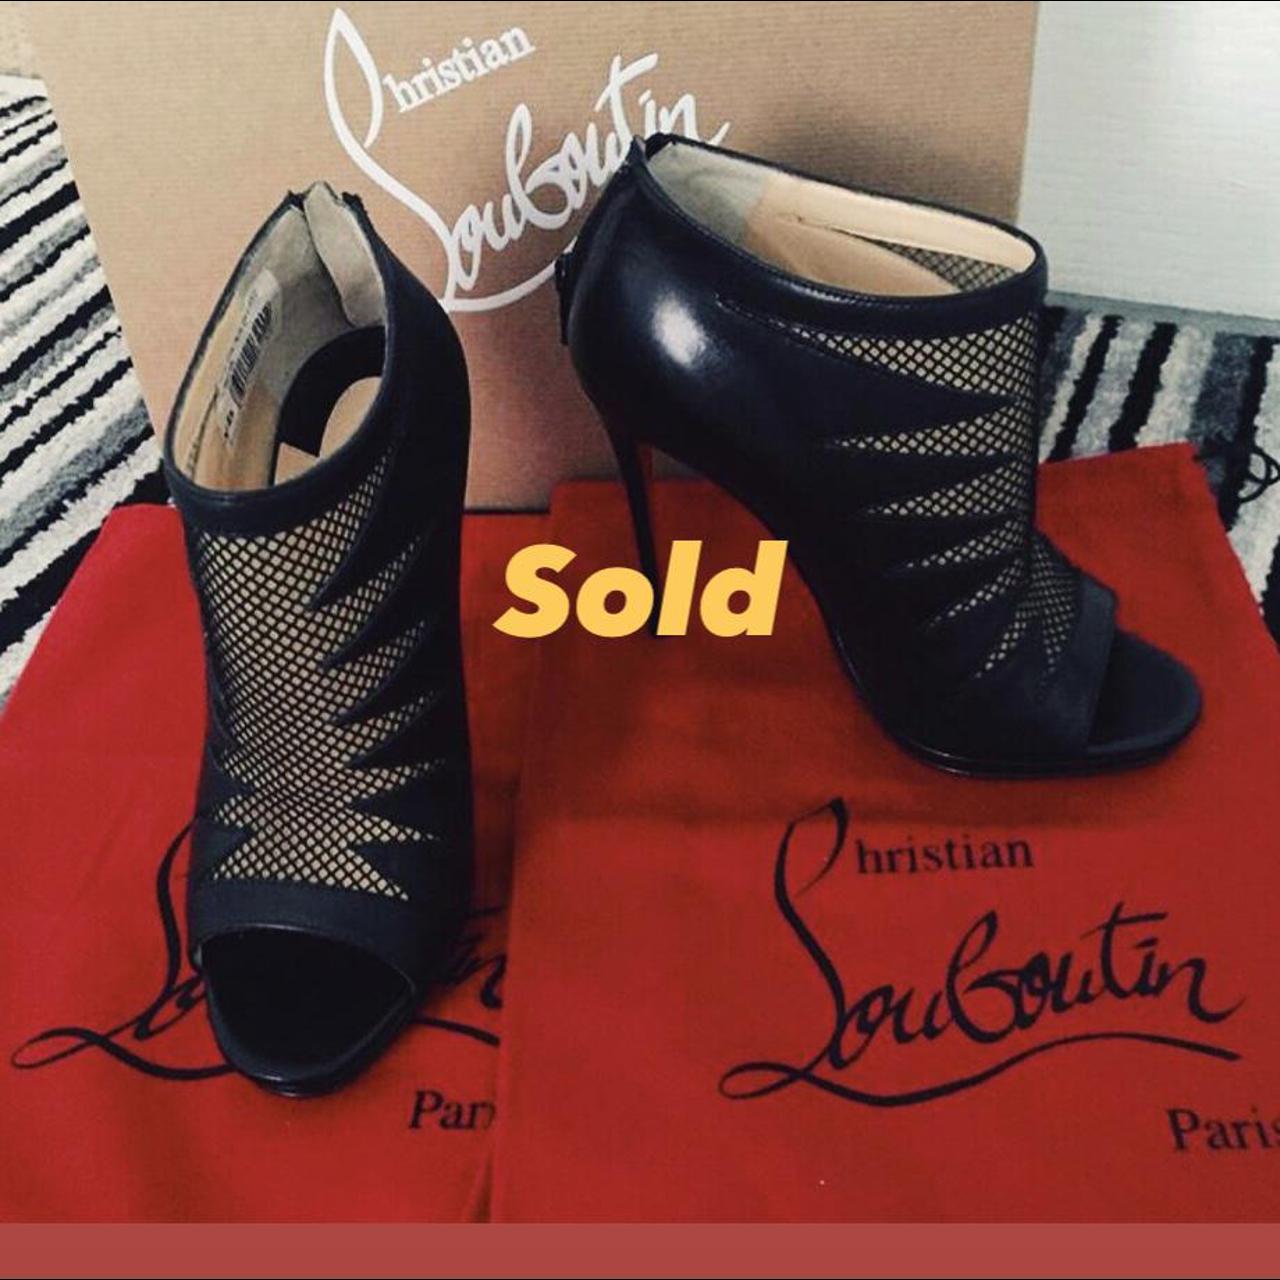 These Christian Louboutins are in amazing condition - Depop